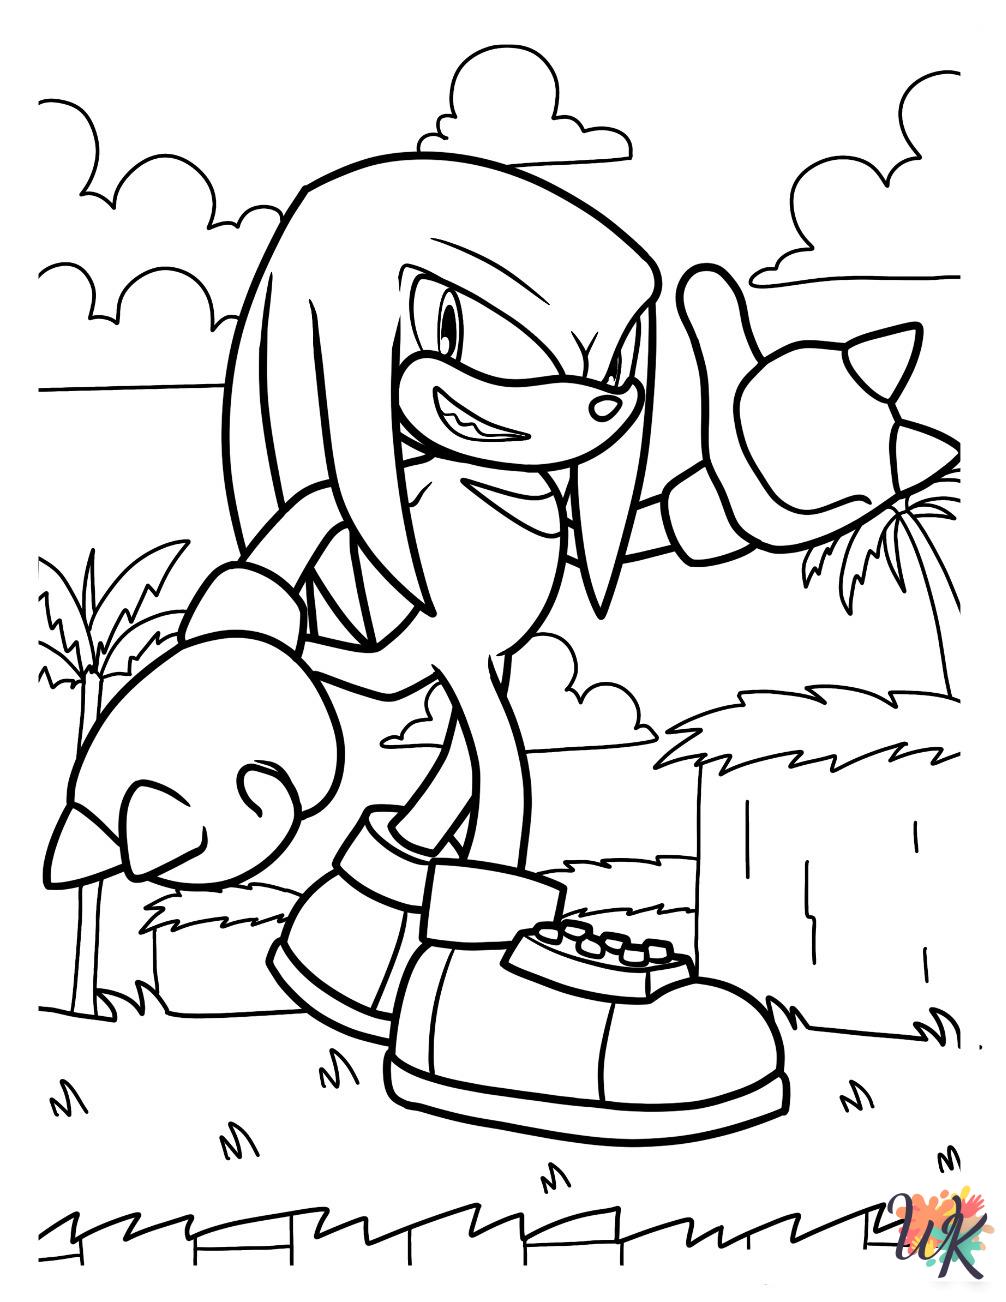 Knuckles coloring pages free printable